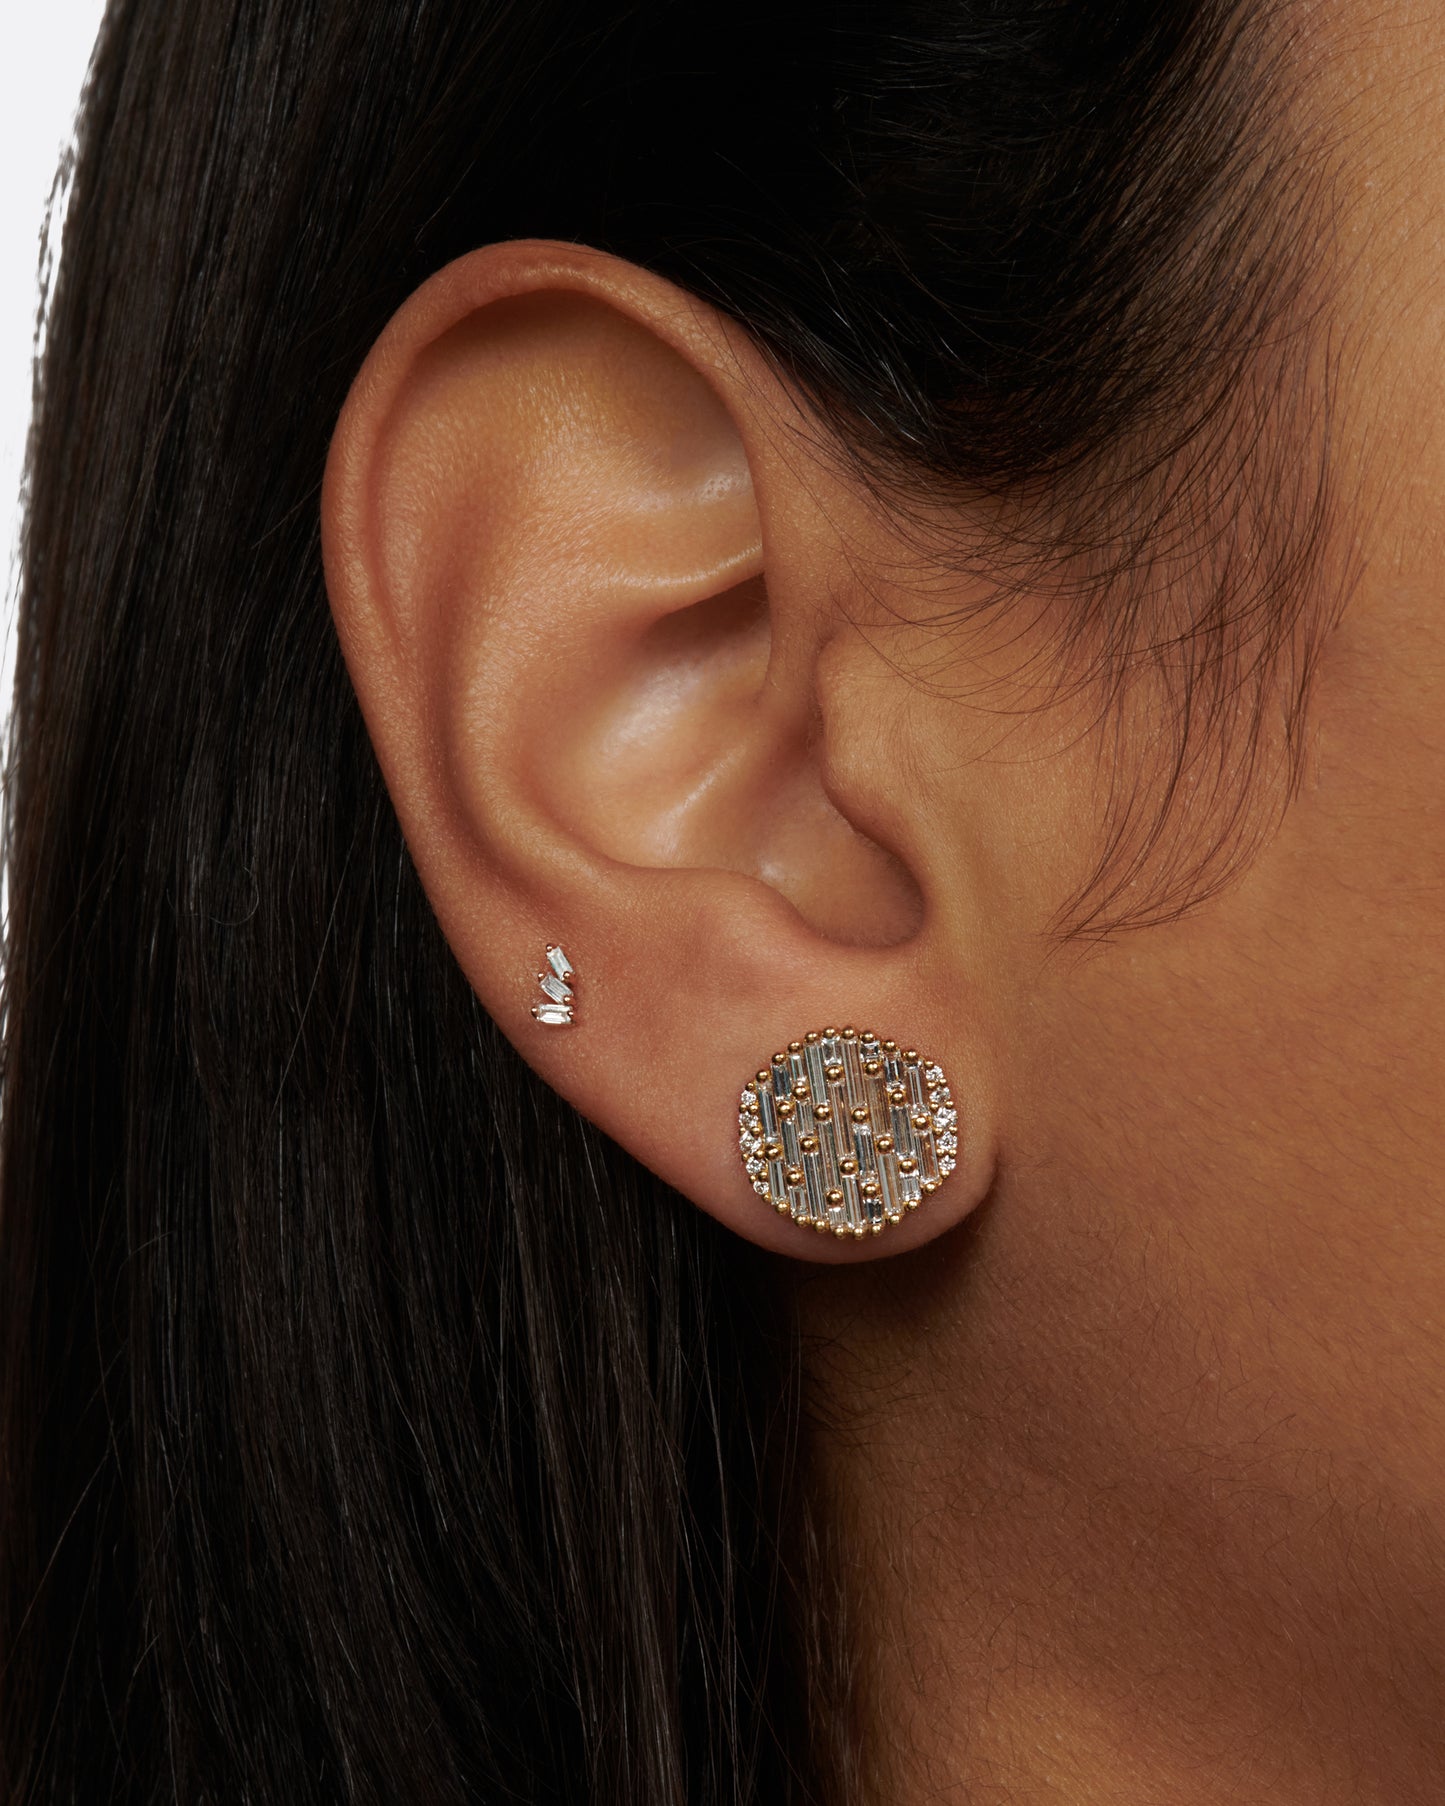 A pair of round, slightly concave stud earrings covered in baguette diamonds.